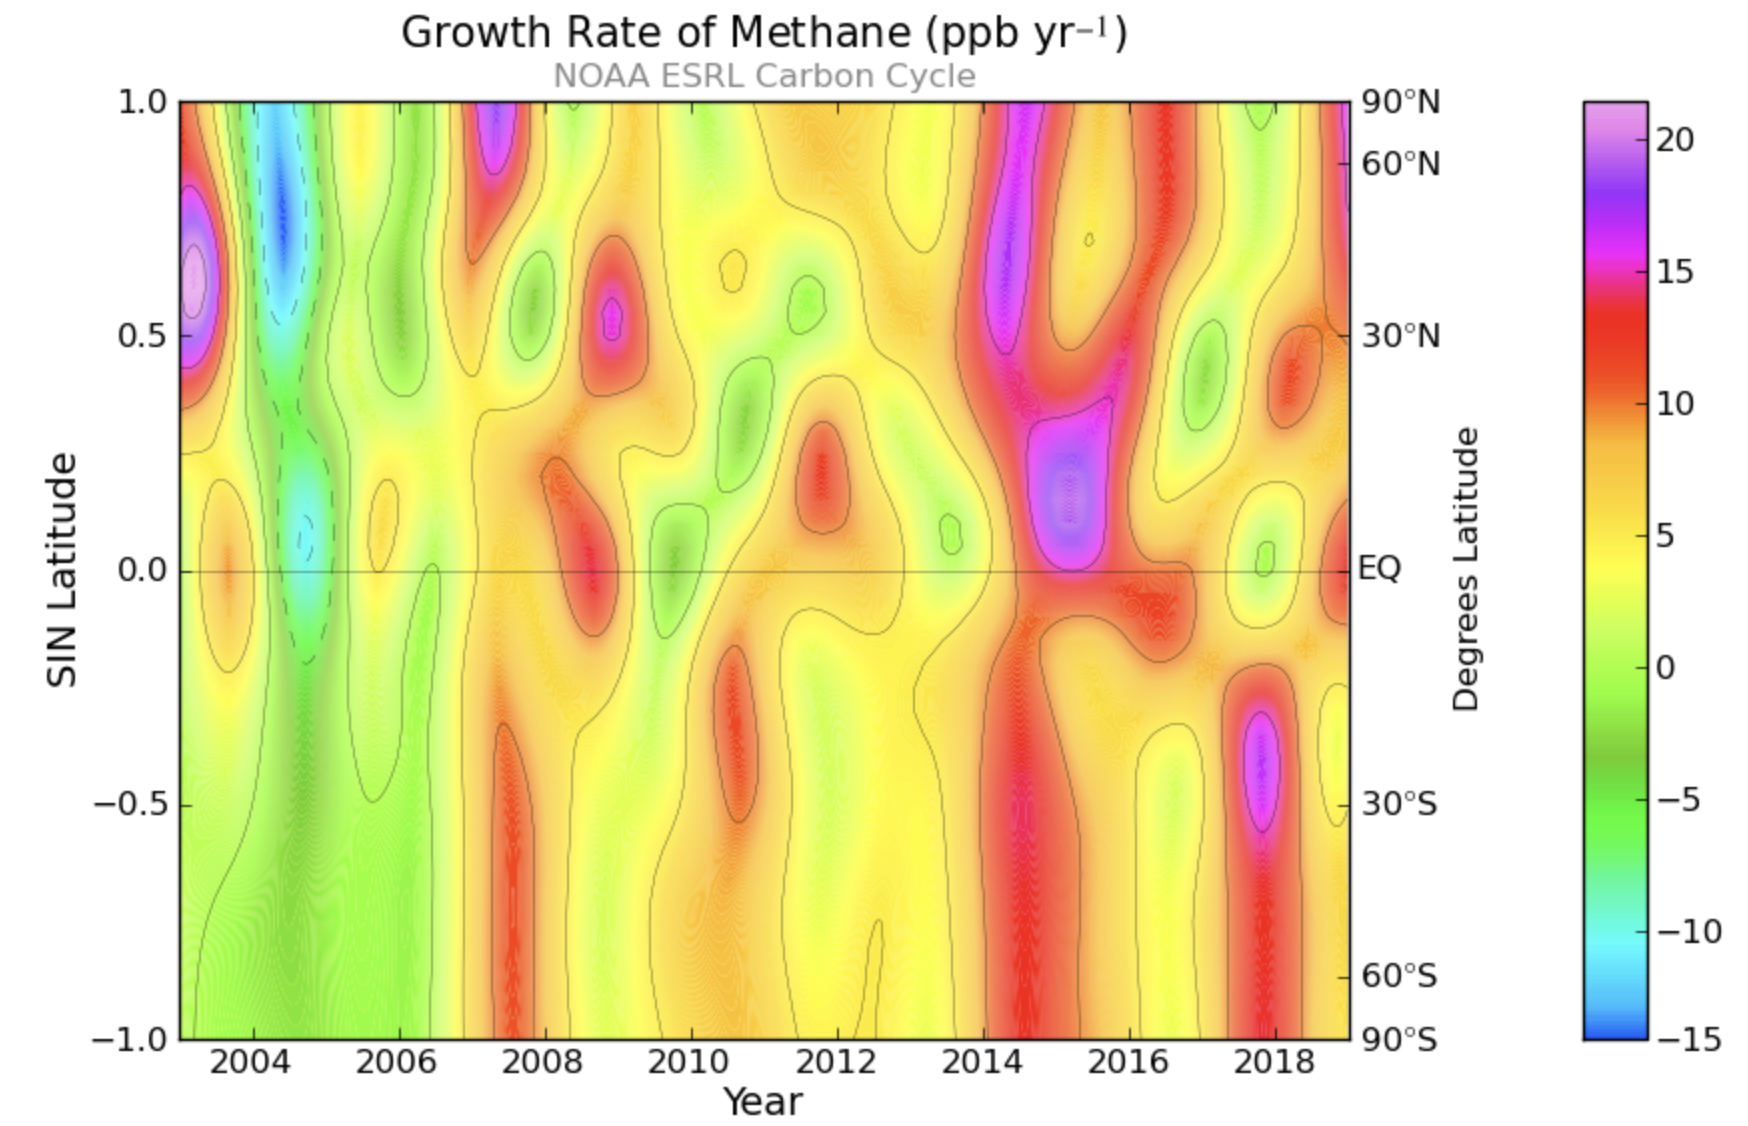 Heat map chart showing methane growth rates across latitudes.